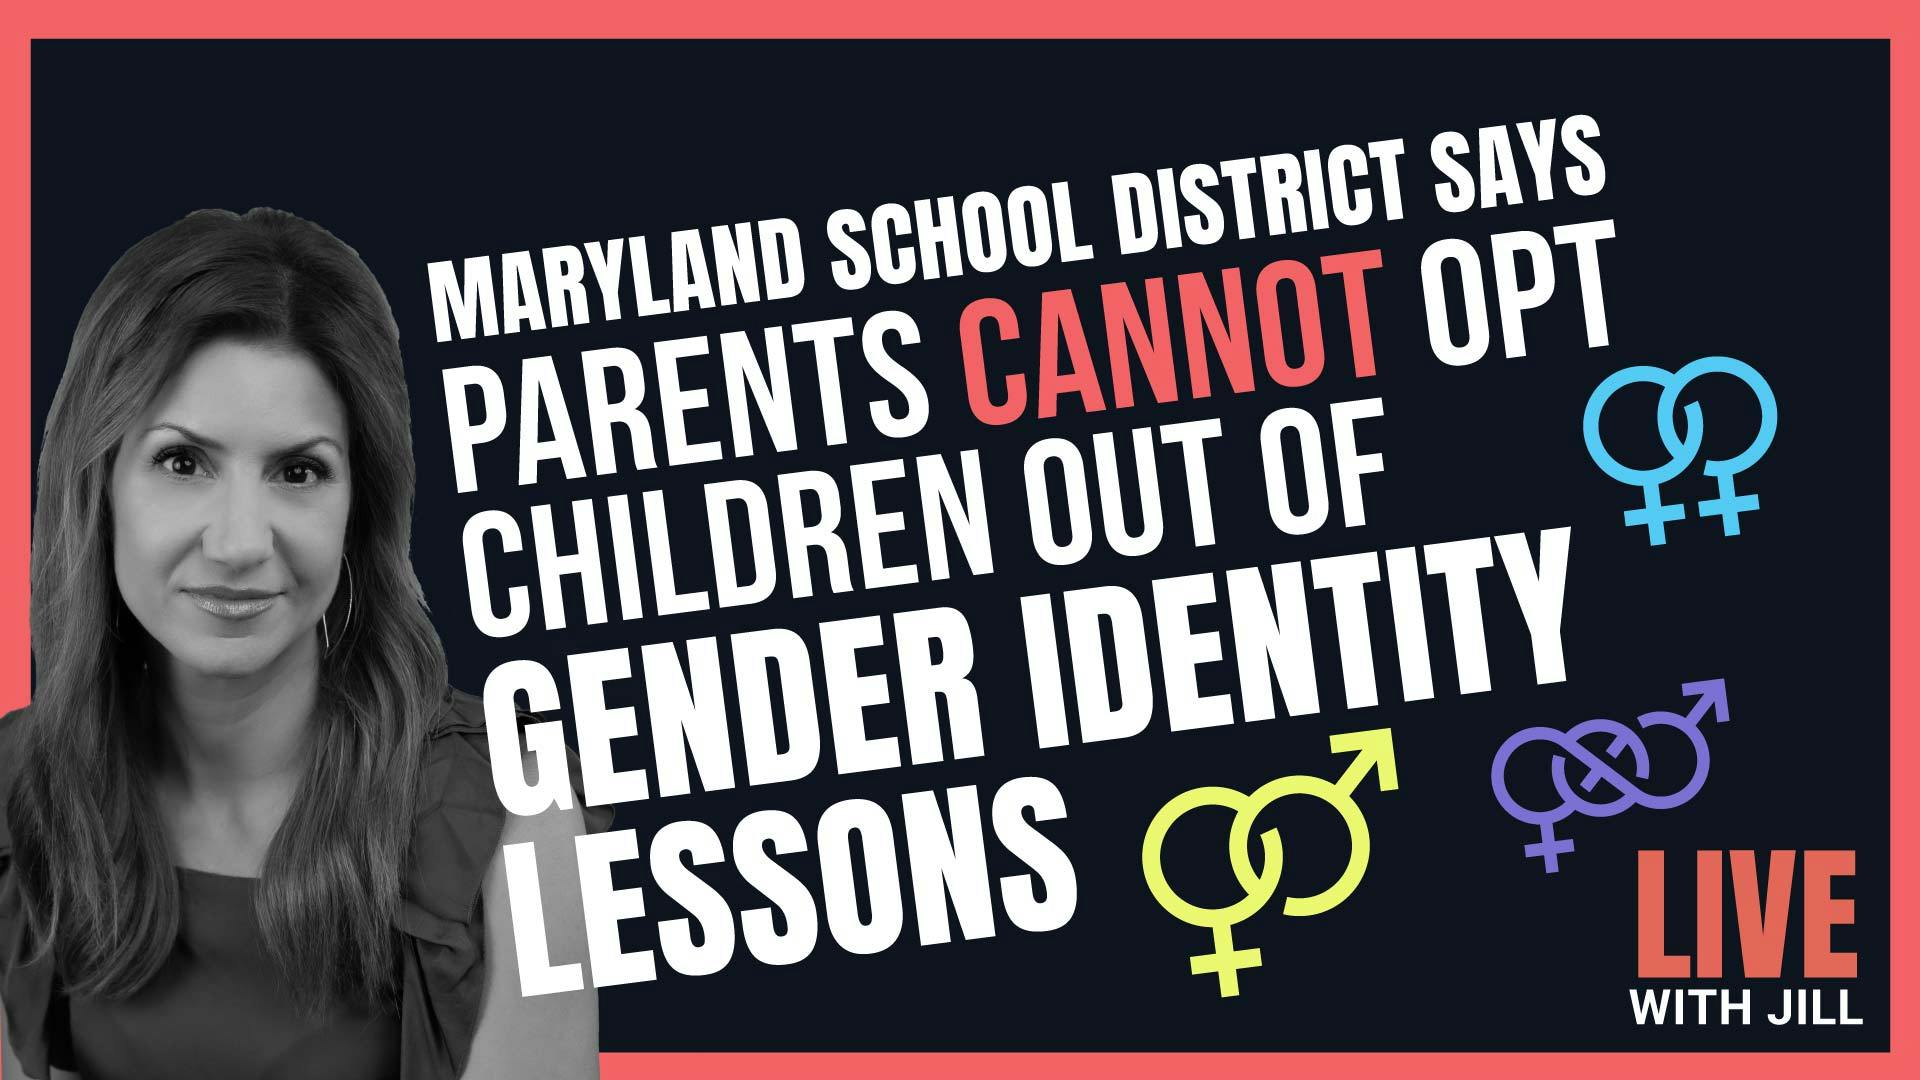 Maryland School District Prevents Parents from Opting Kids Out of Gender Identity Lessons!